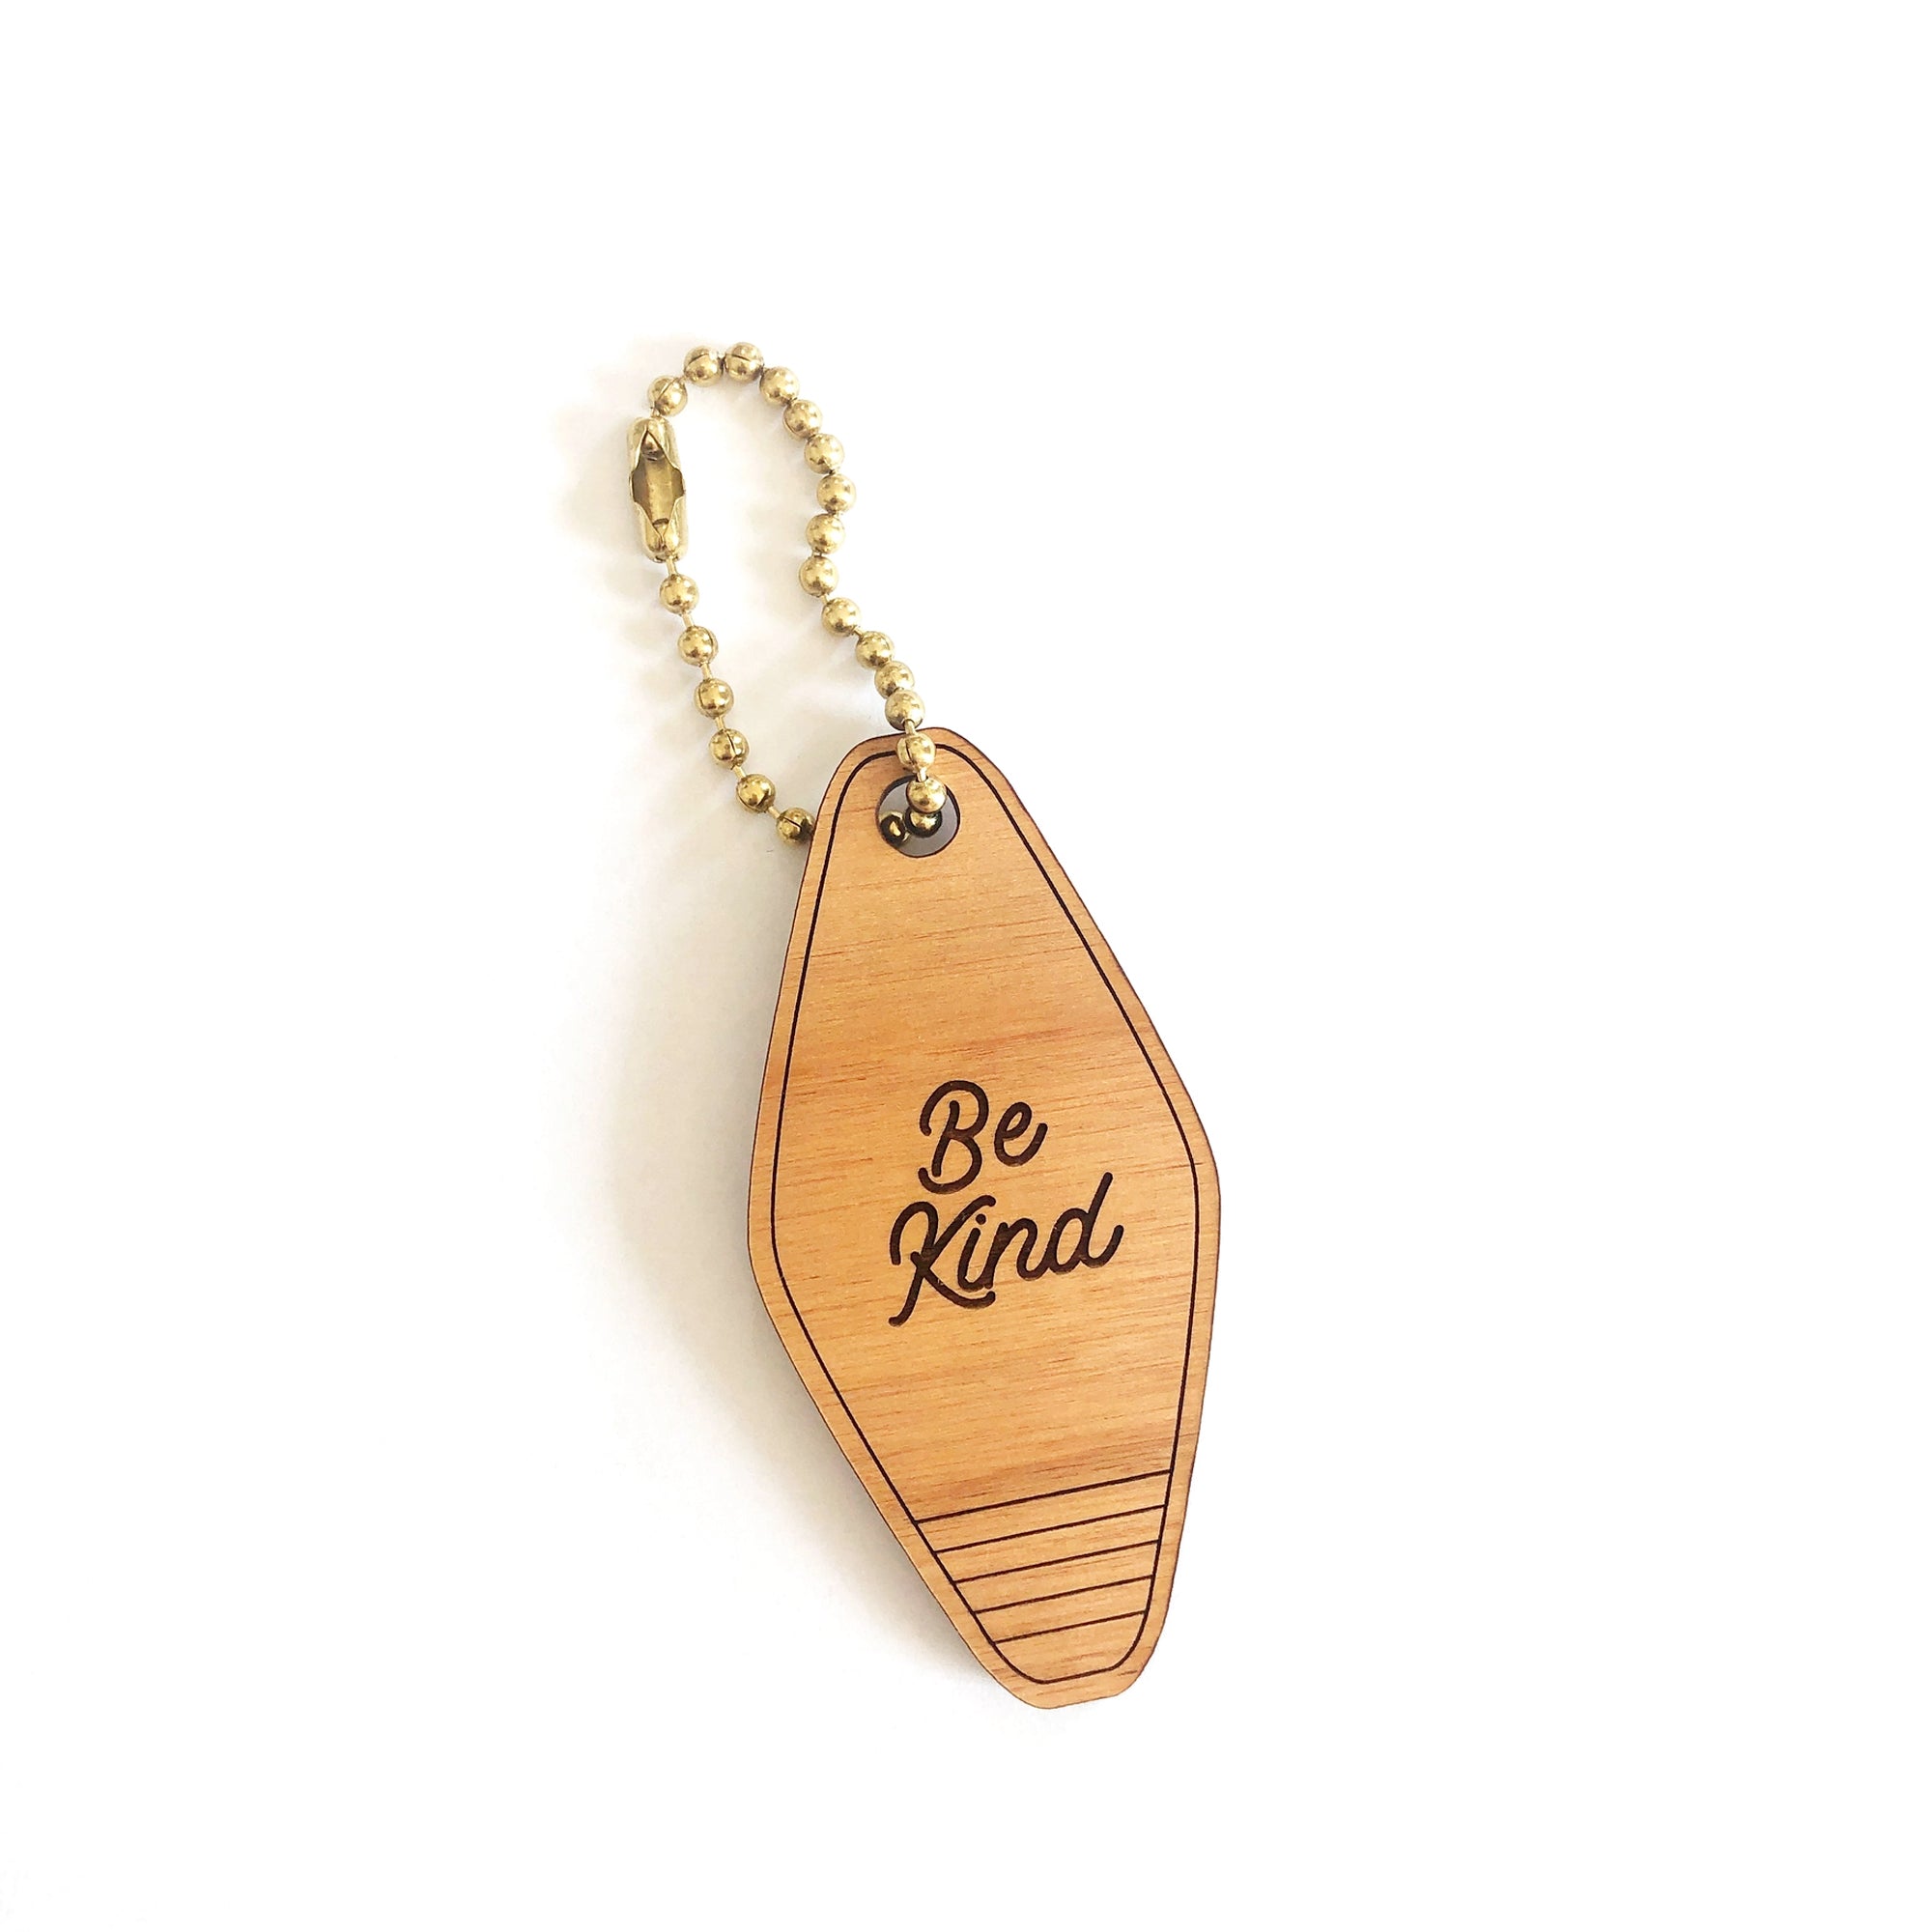 Be Kind Wooden Key Chain